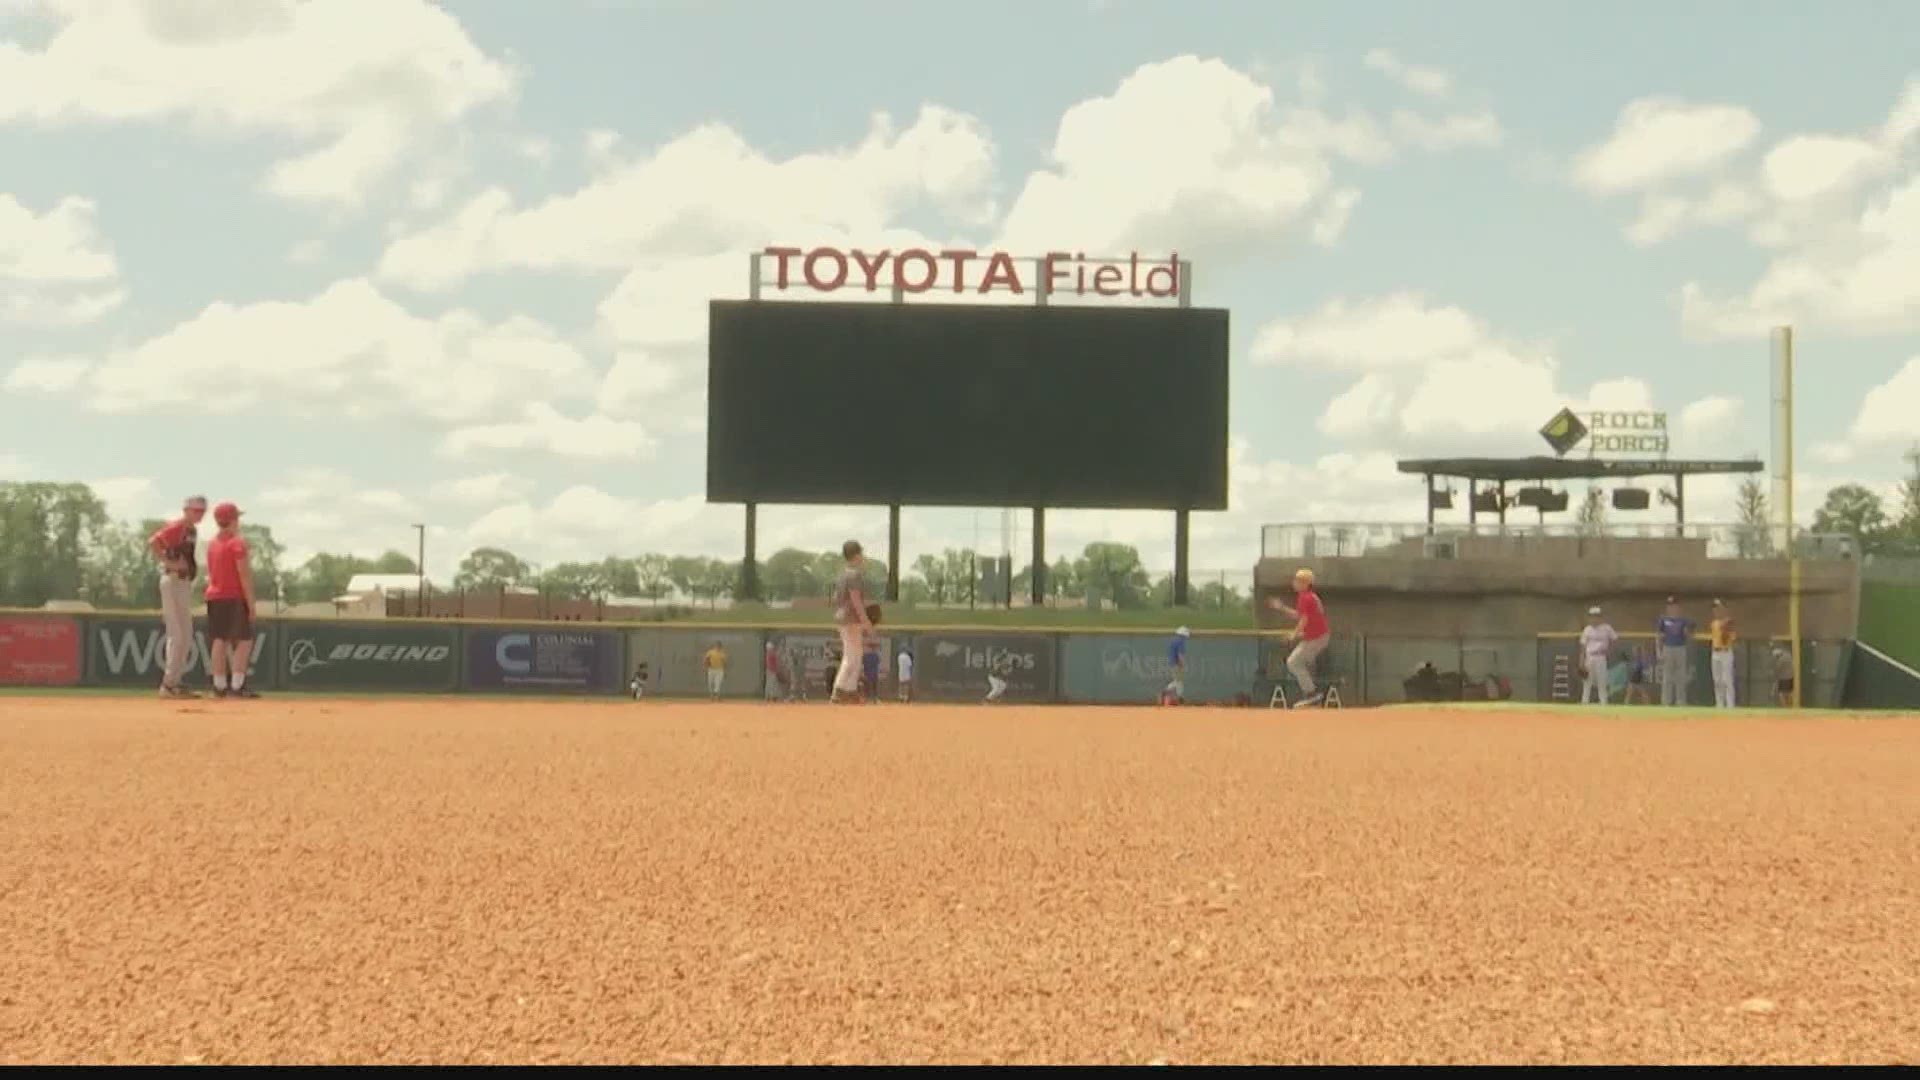 "Visit MLB.com to learn about Toyota Field, the home of the Rocket City Trash Pandas."